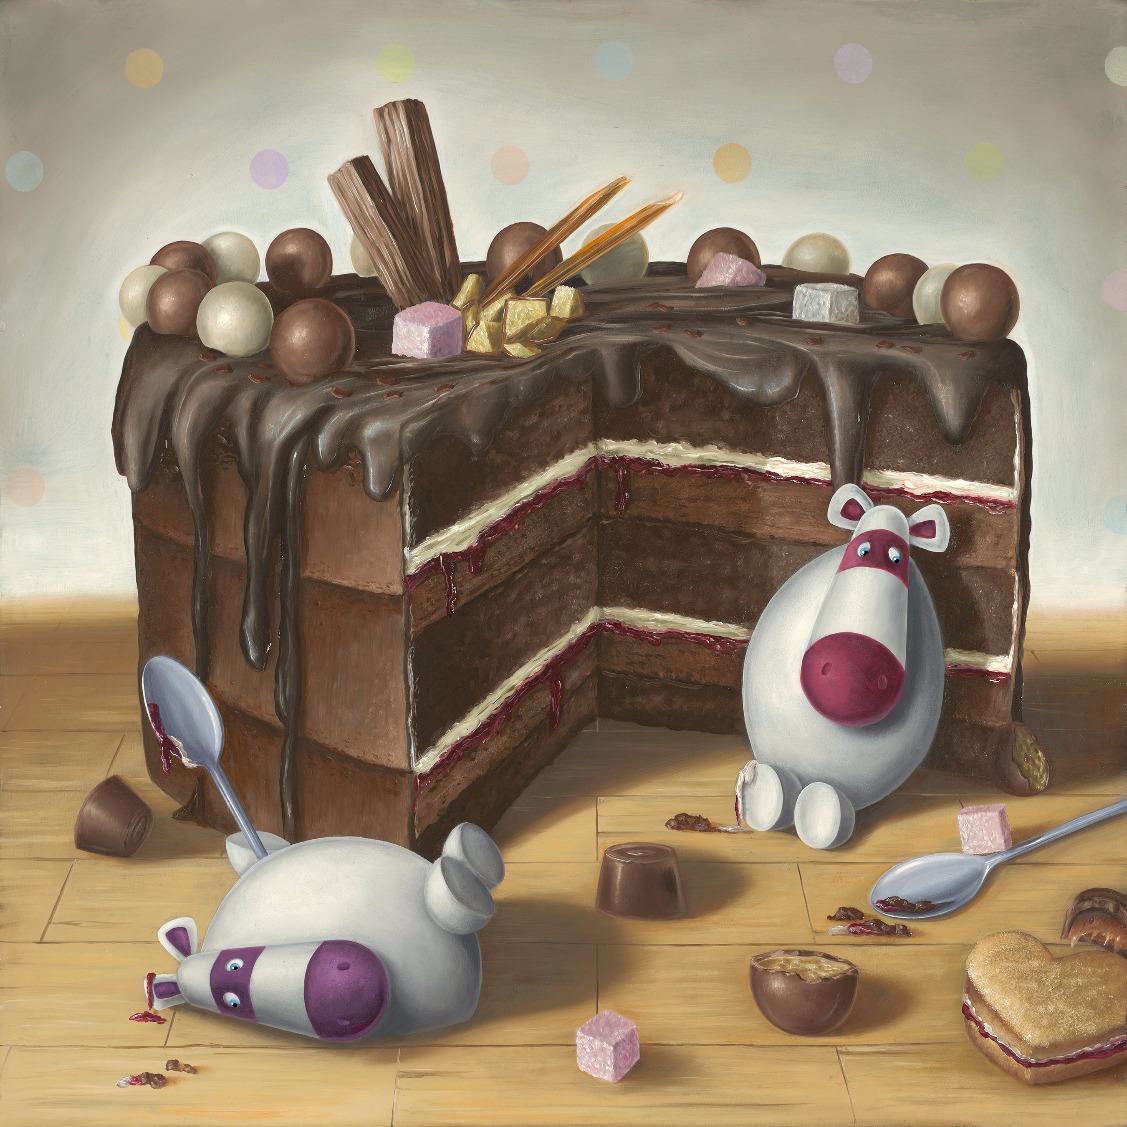 Let Them Eat Cake by Peter Smith, Family